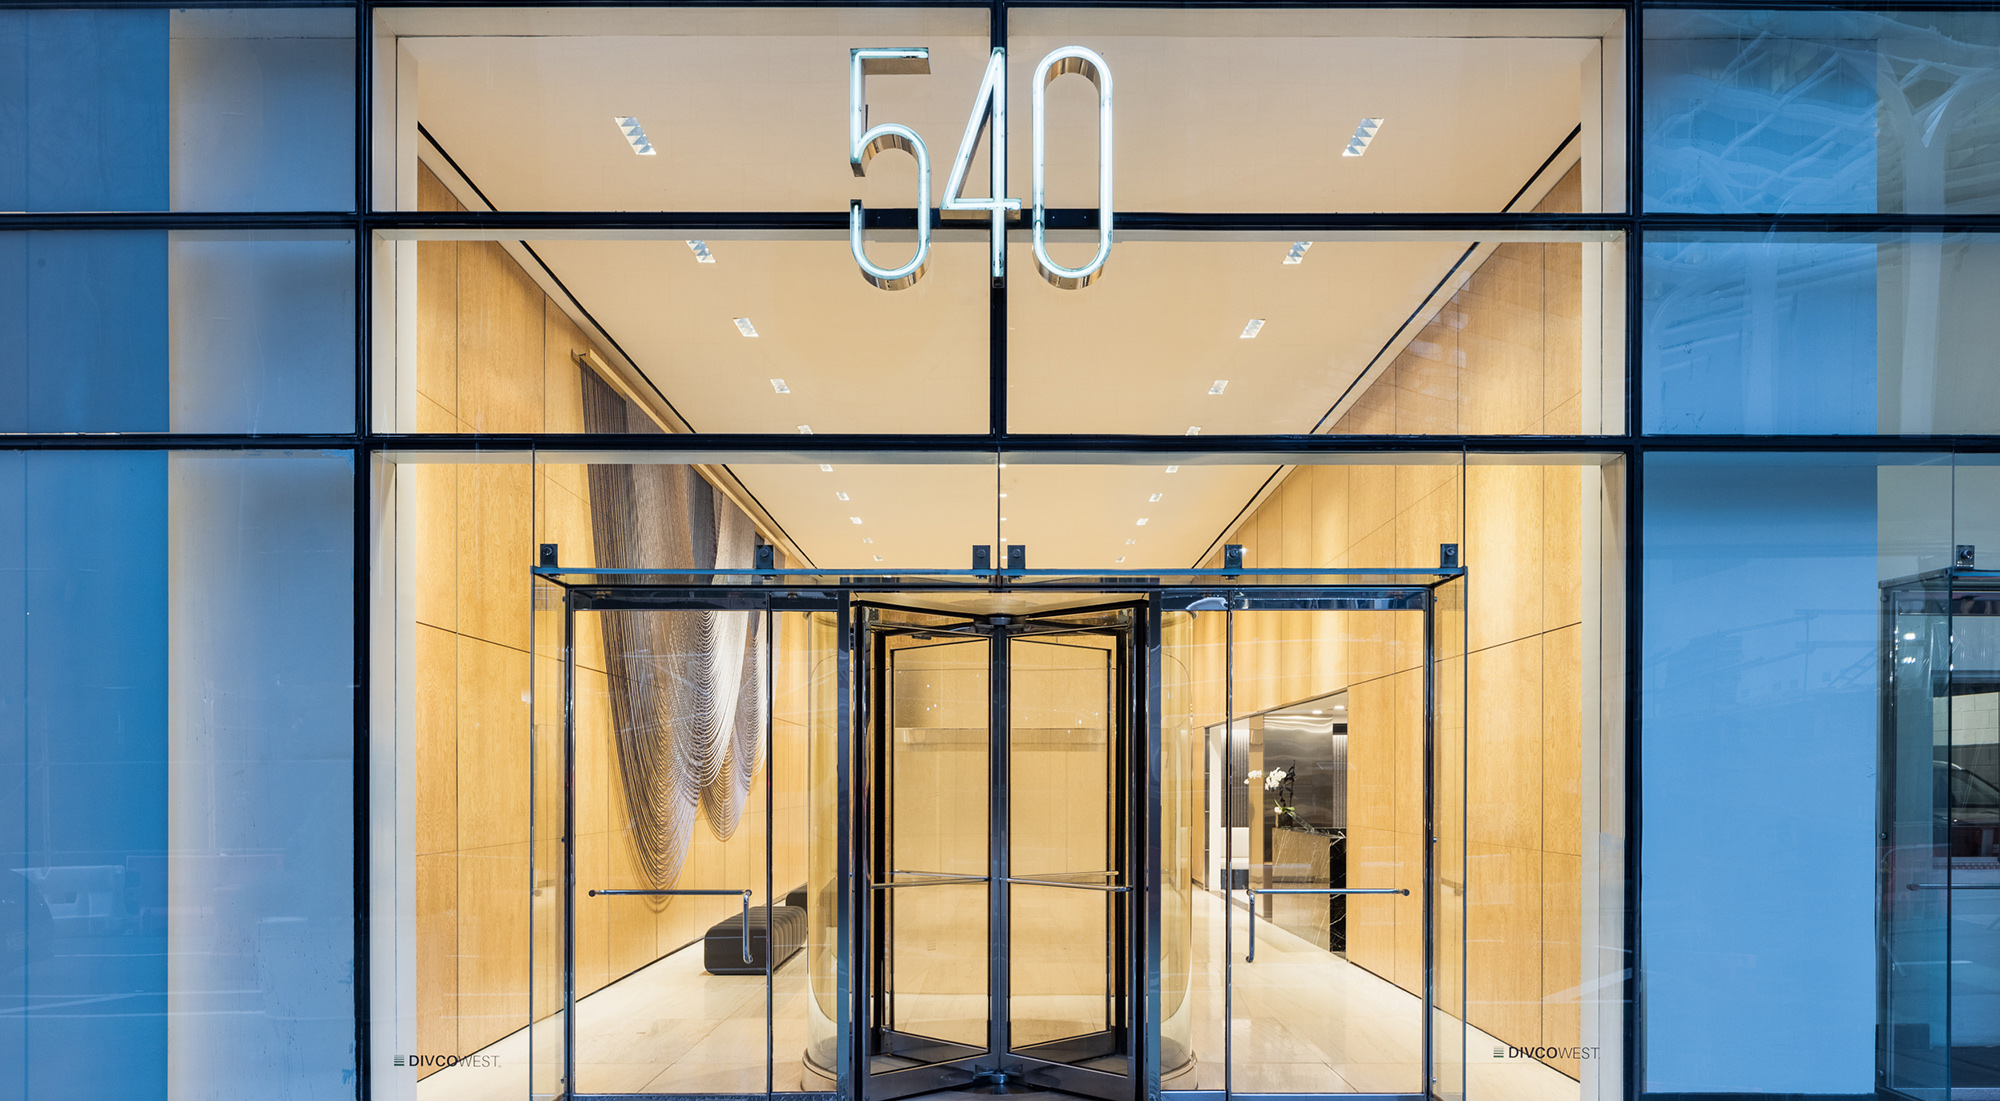 540 Madison building glass entrance with neon light address sign